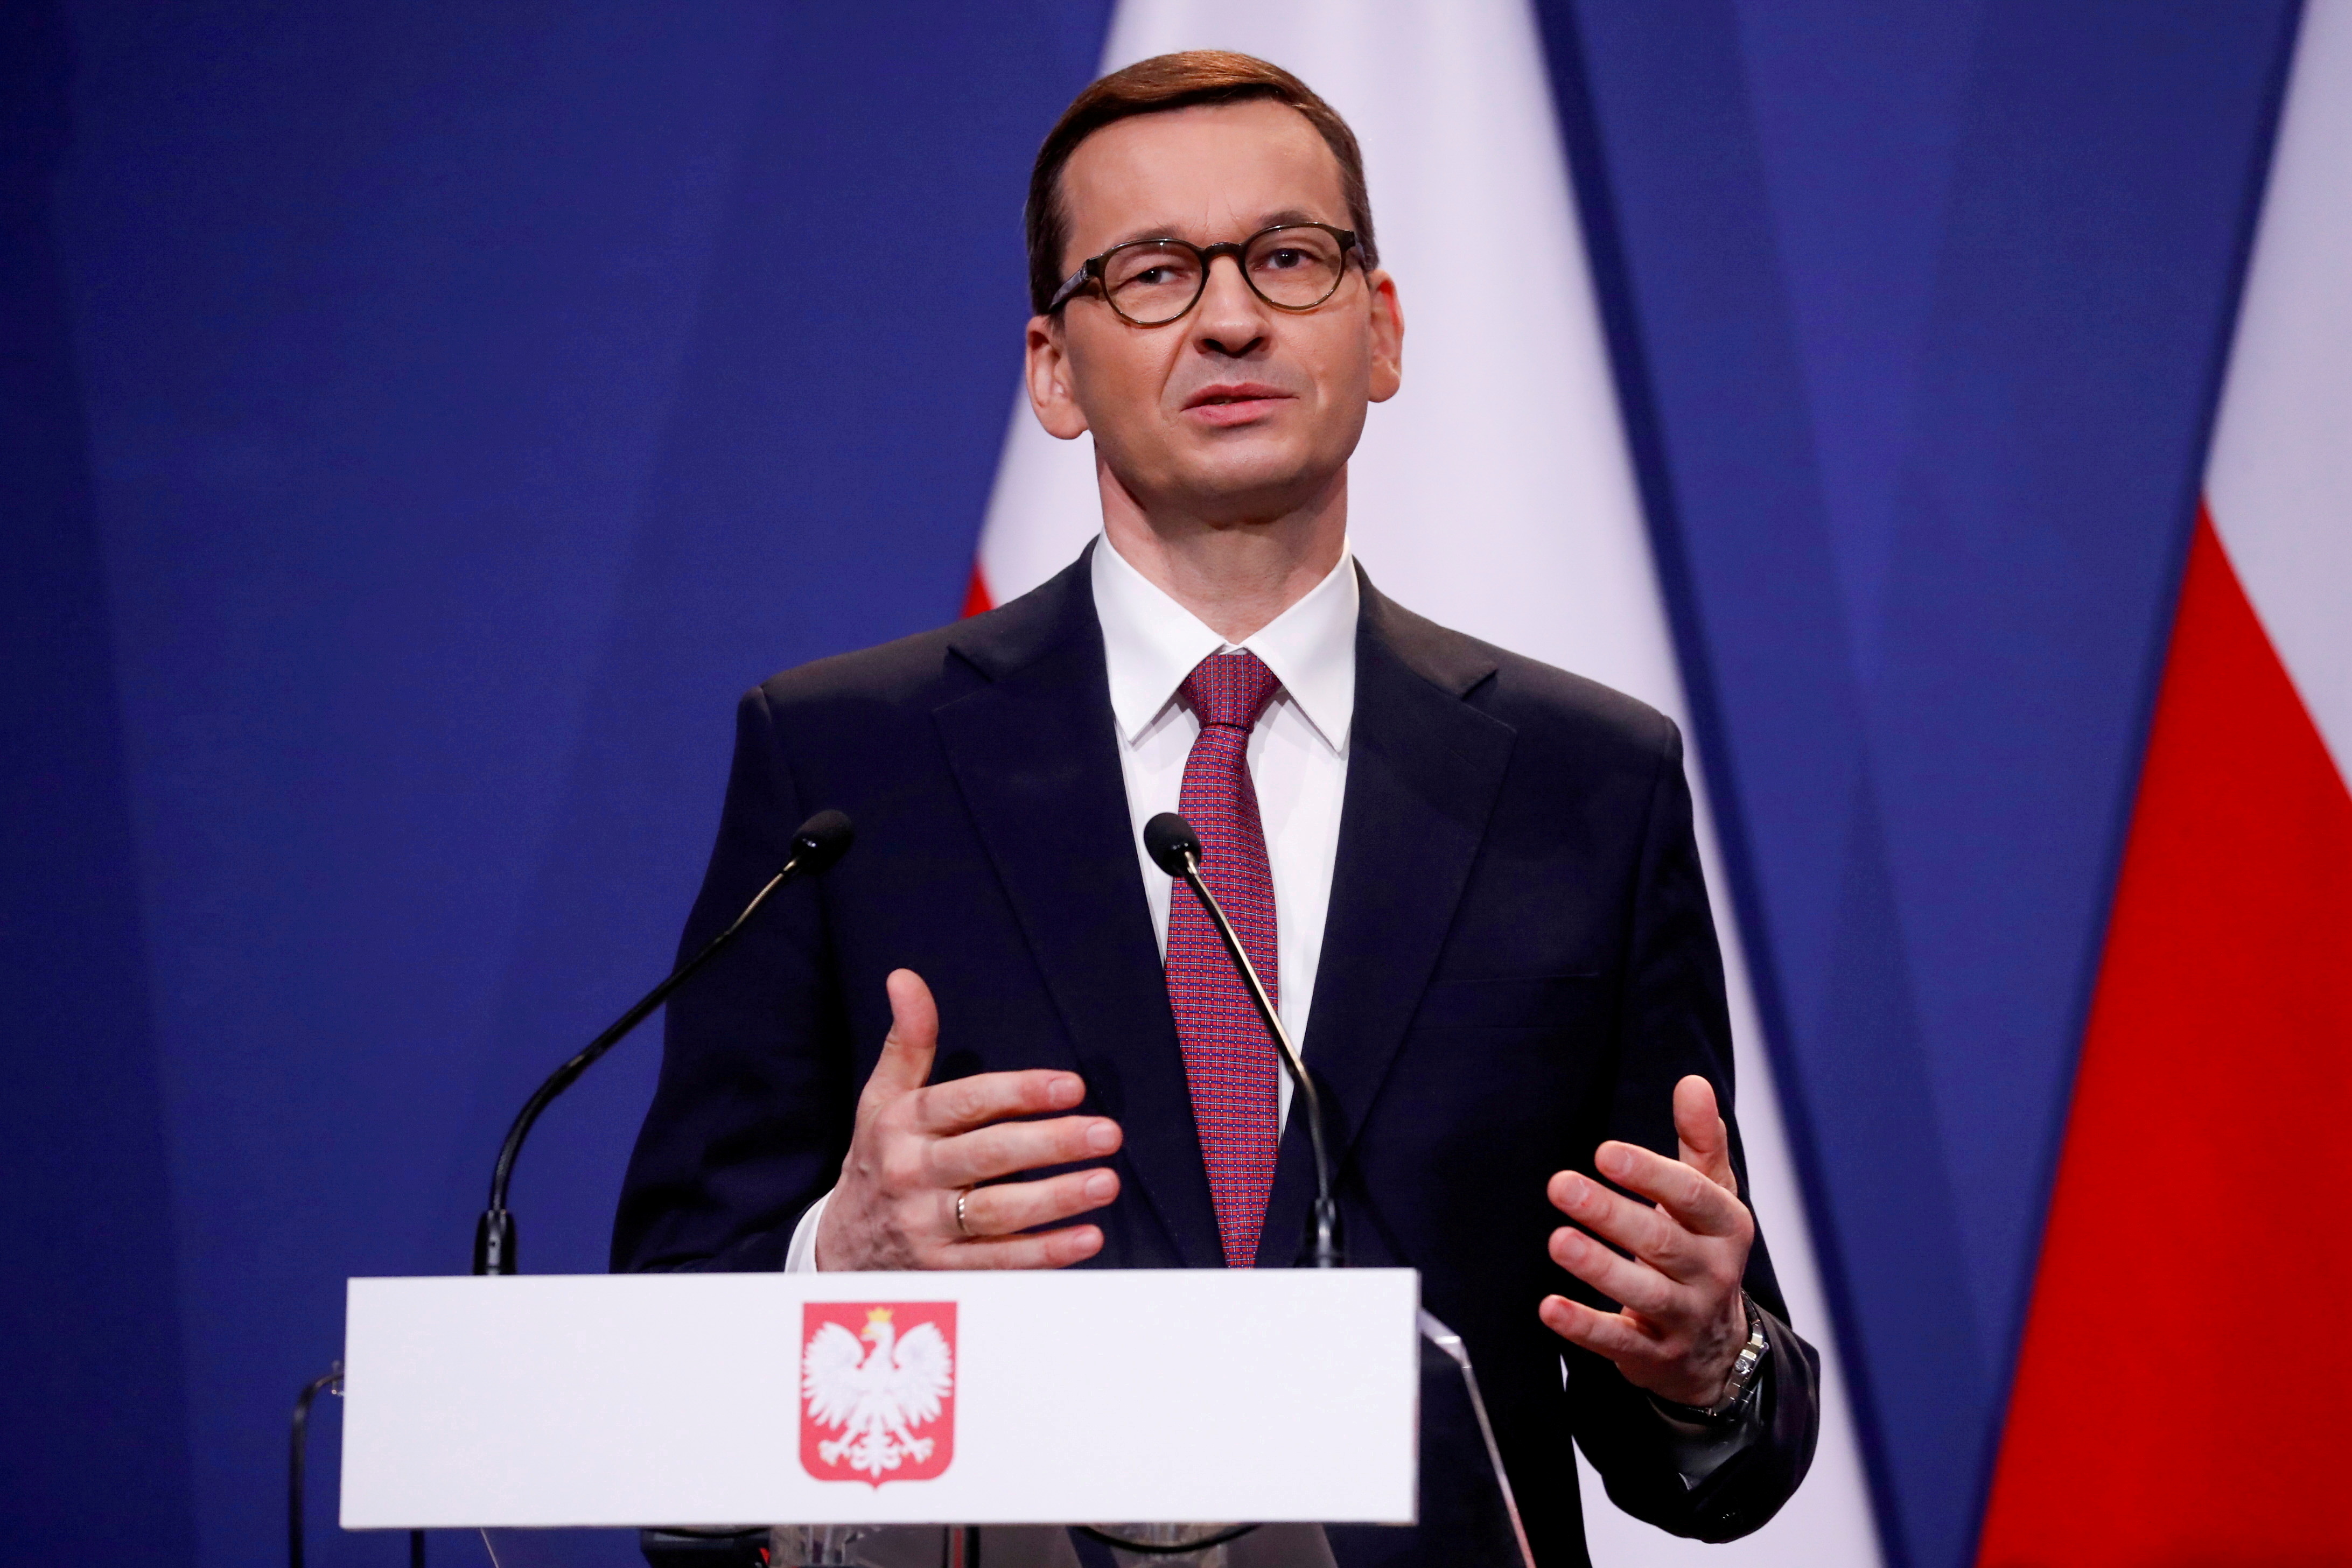 Poland calls Germany’s position ‘major obstacle’ to tightening sanctions against Russia